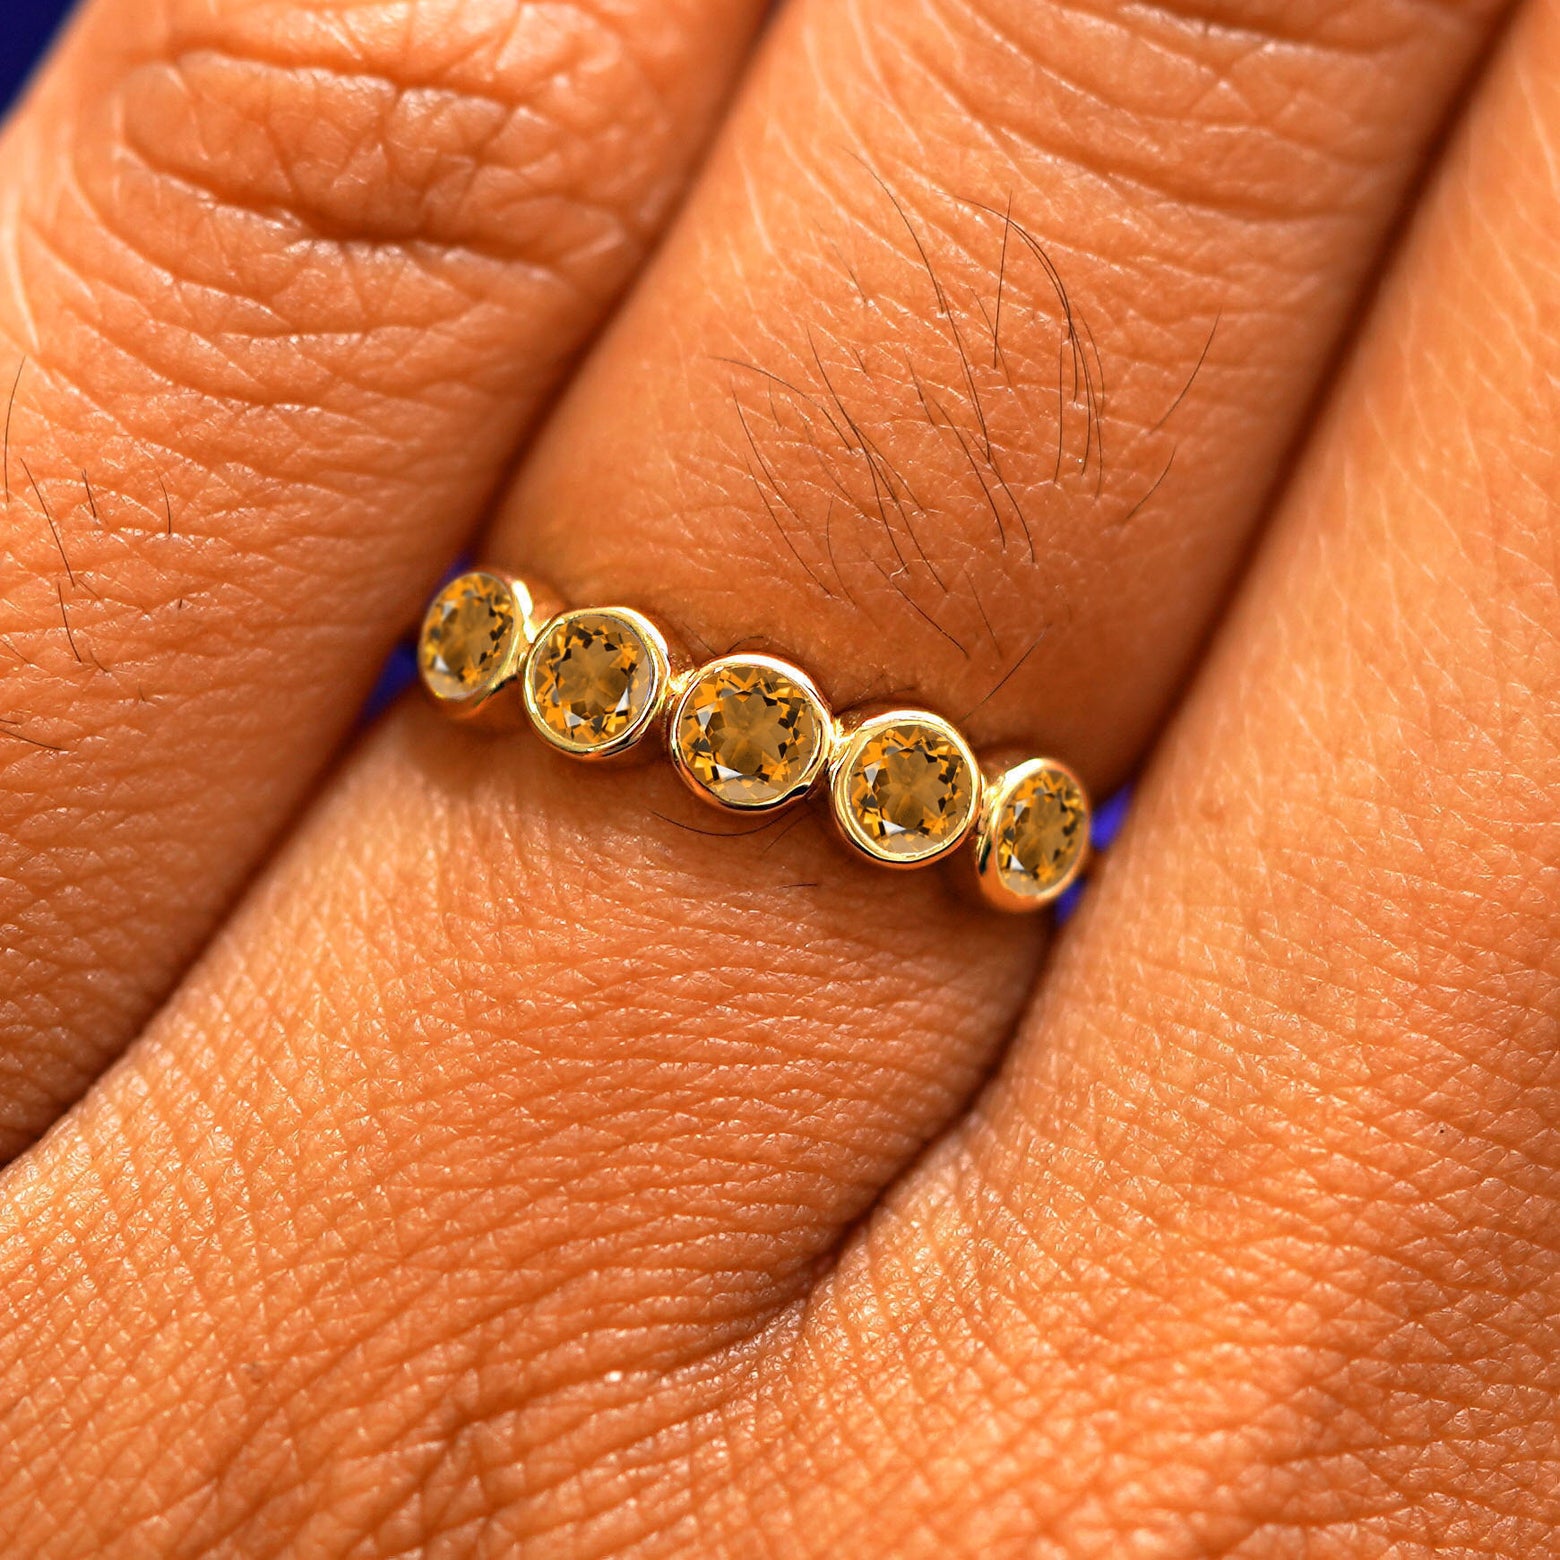 Close up view of a model's hand wearing a yellow gold 5 Gemstones Ring in citrine